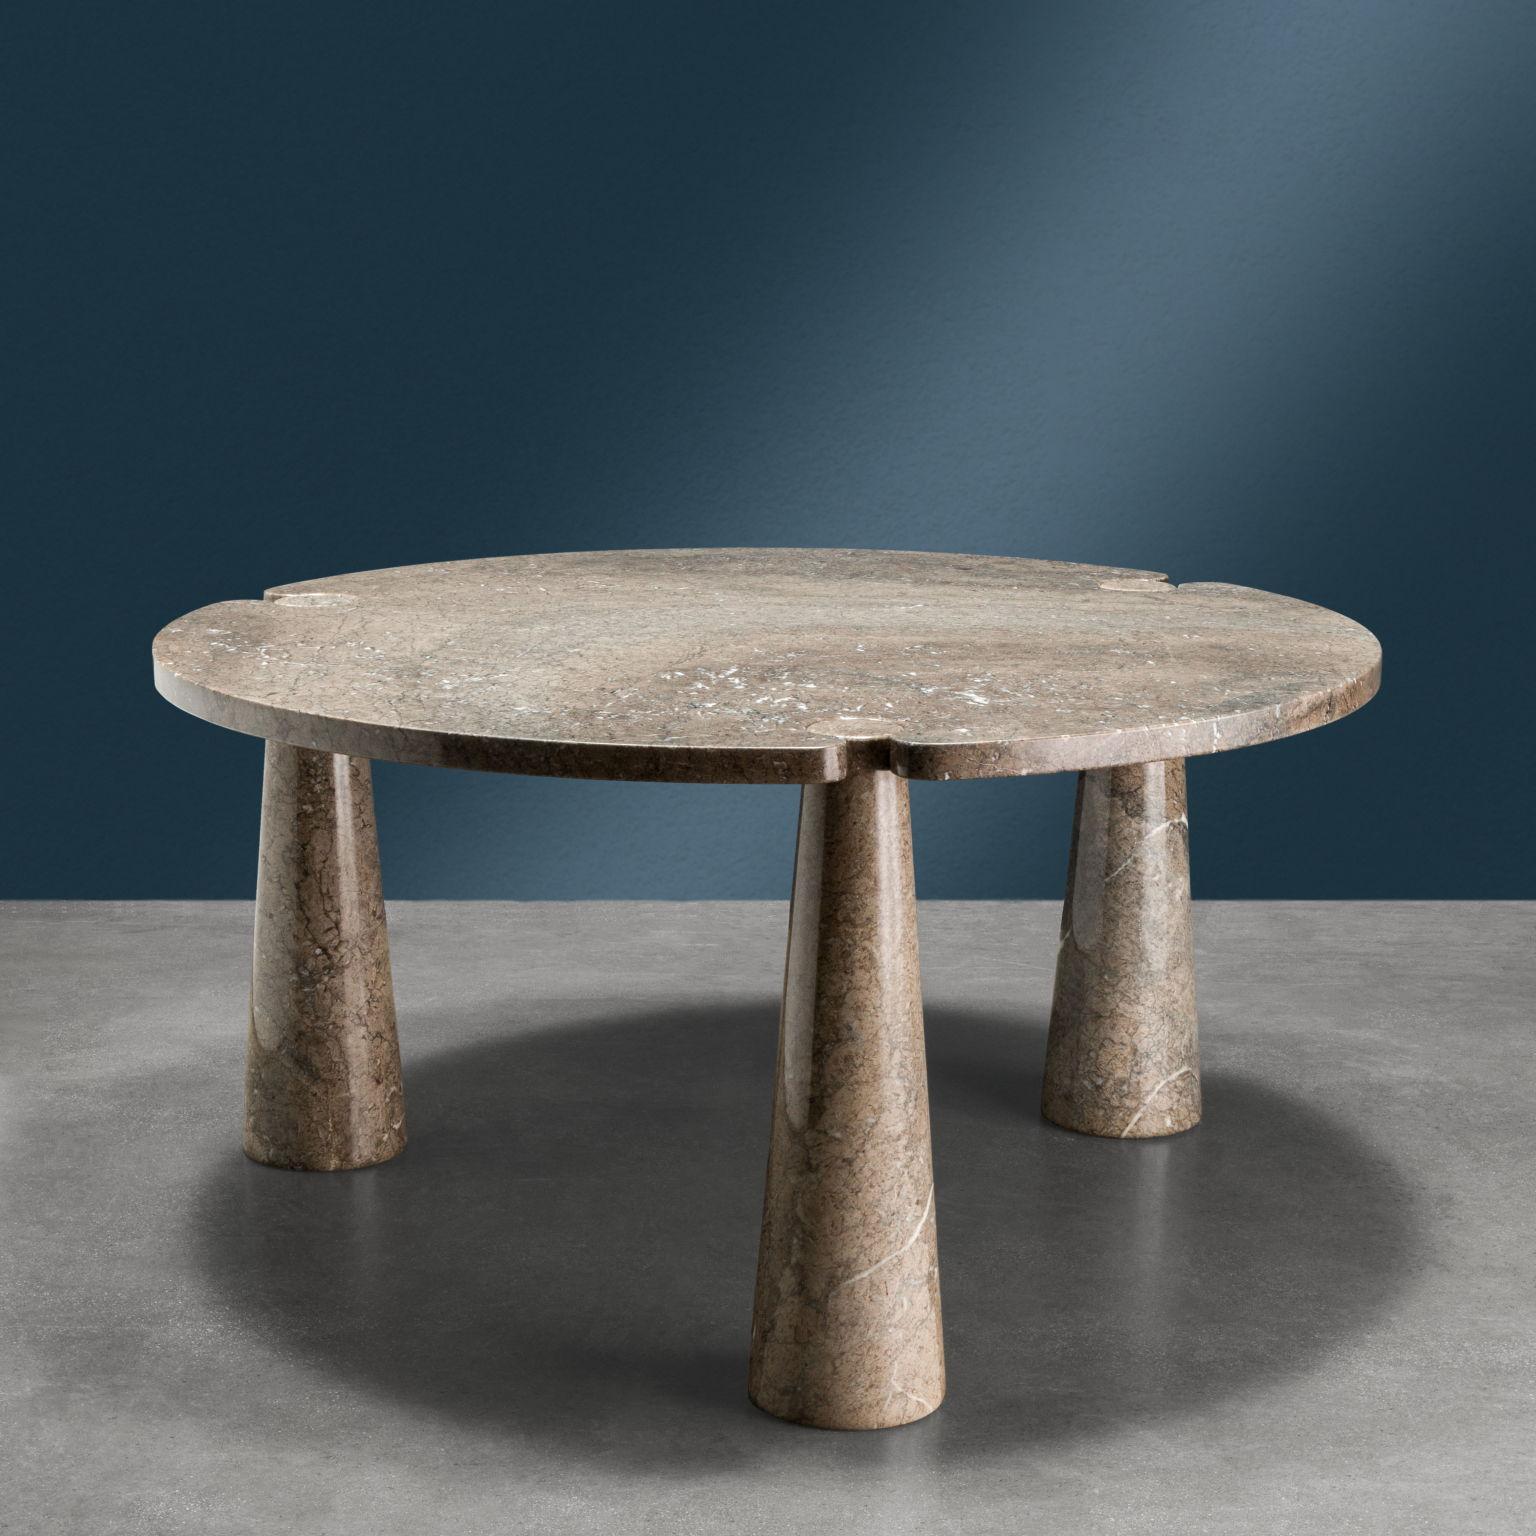 Dining table with round top supported by three legs from the 'Eros' series in Mondragone gray marble. 1970s Skipper production, design Angelo Mangiarotti.